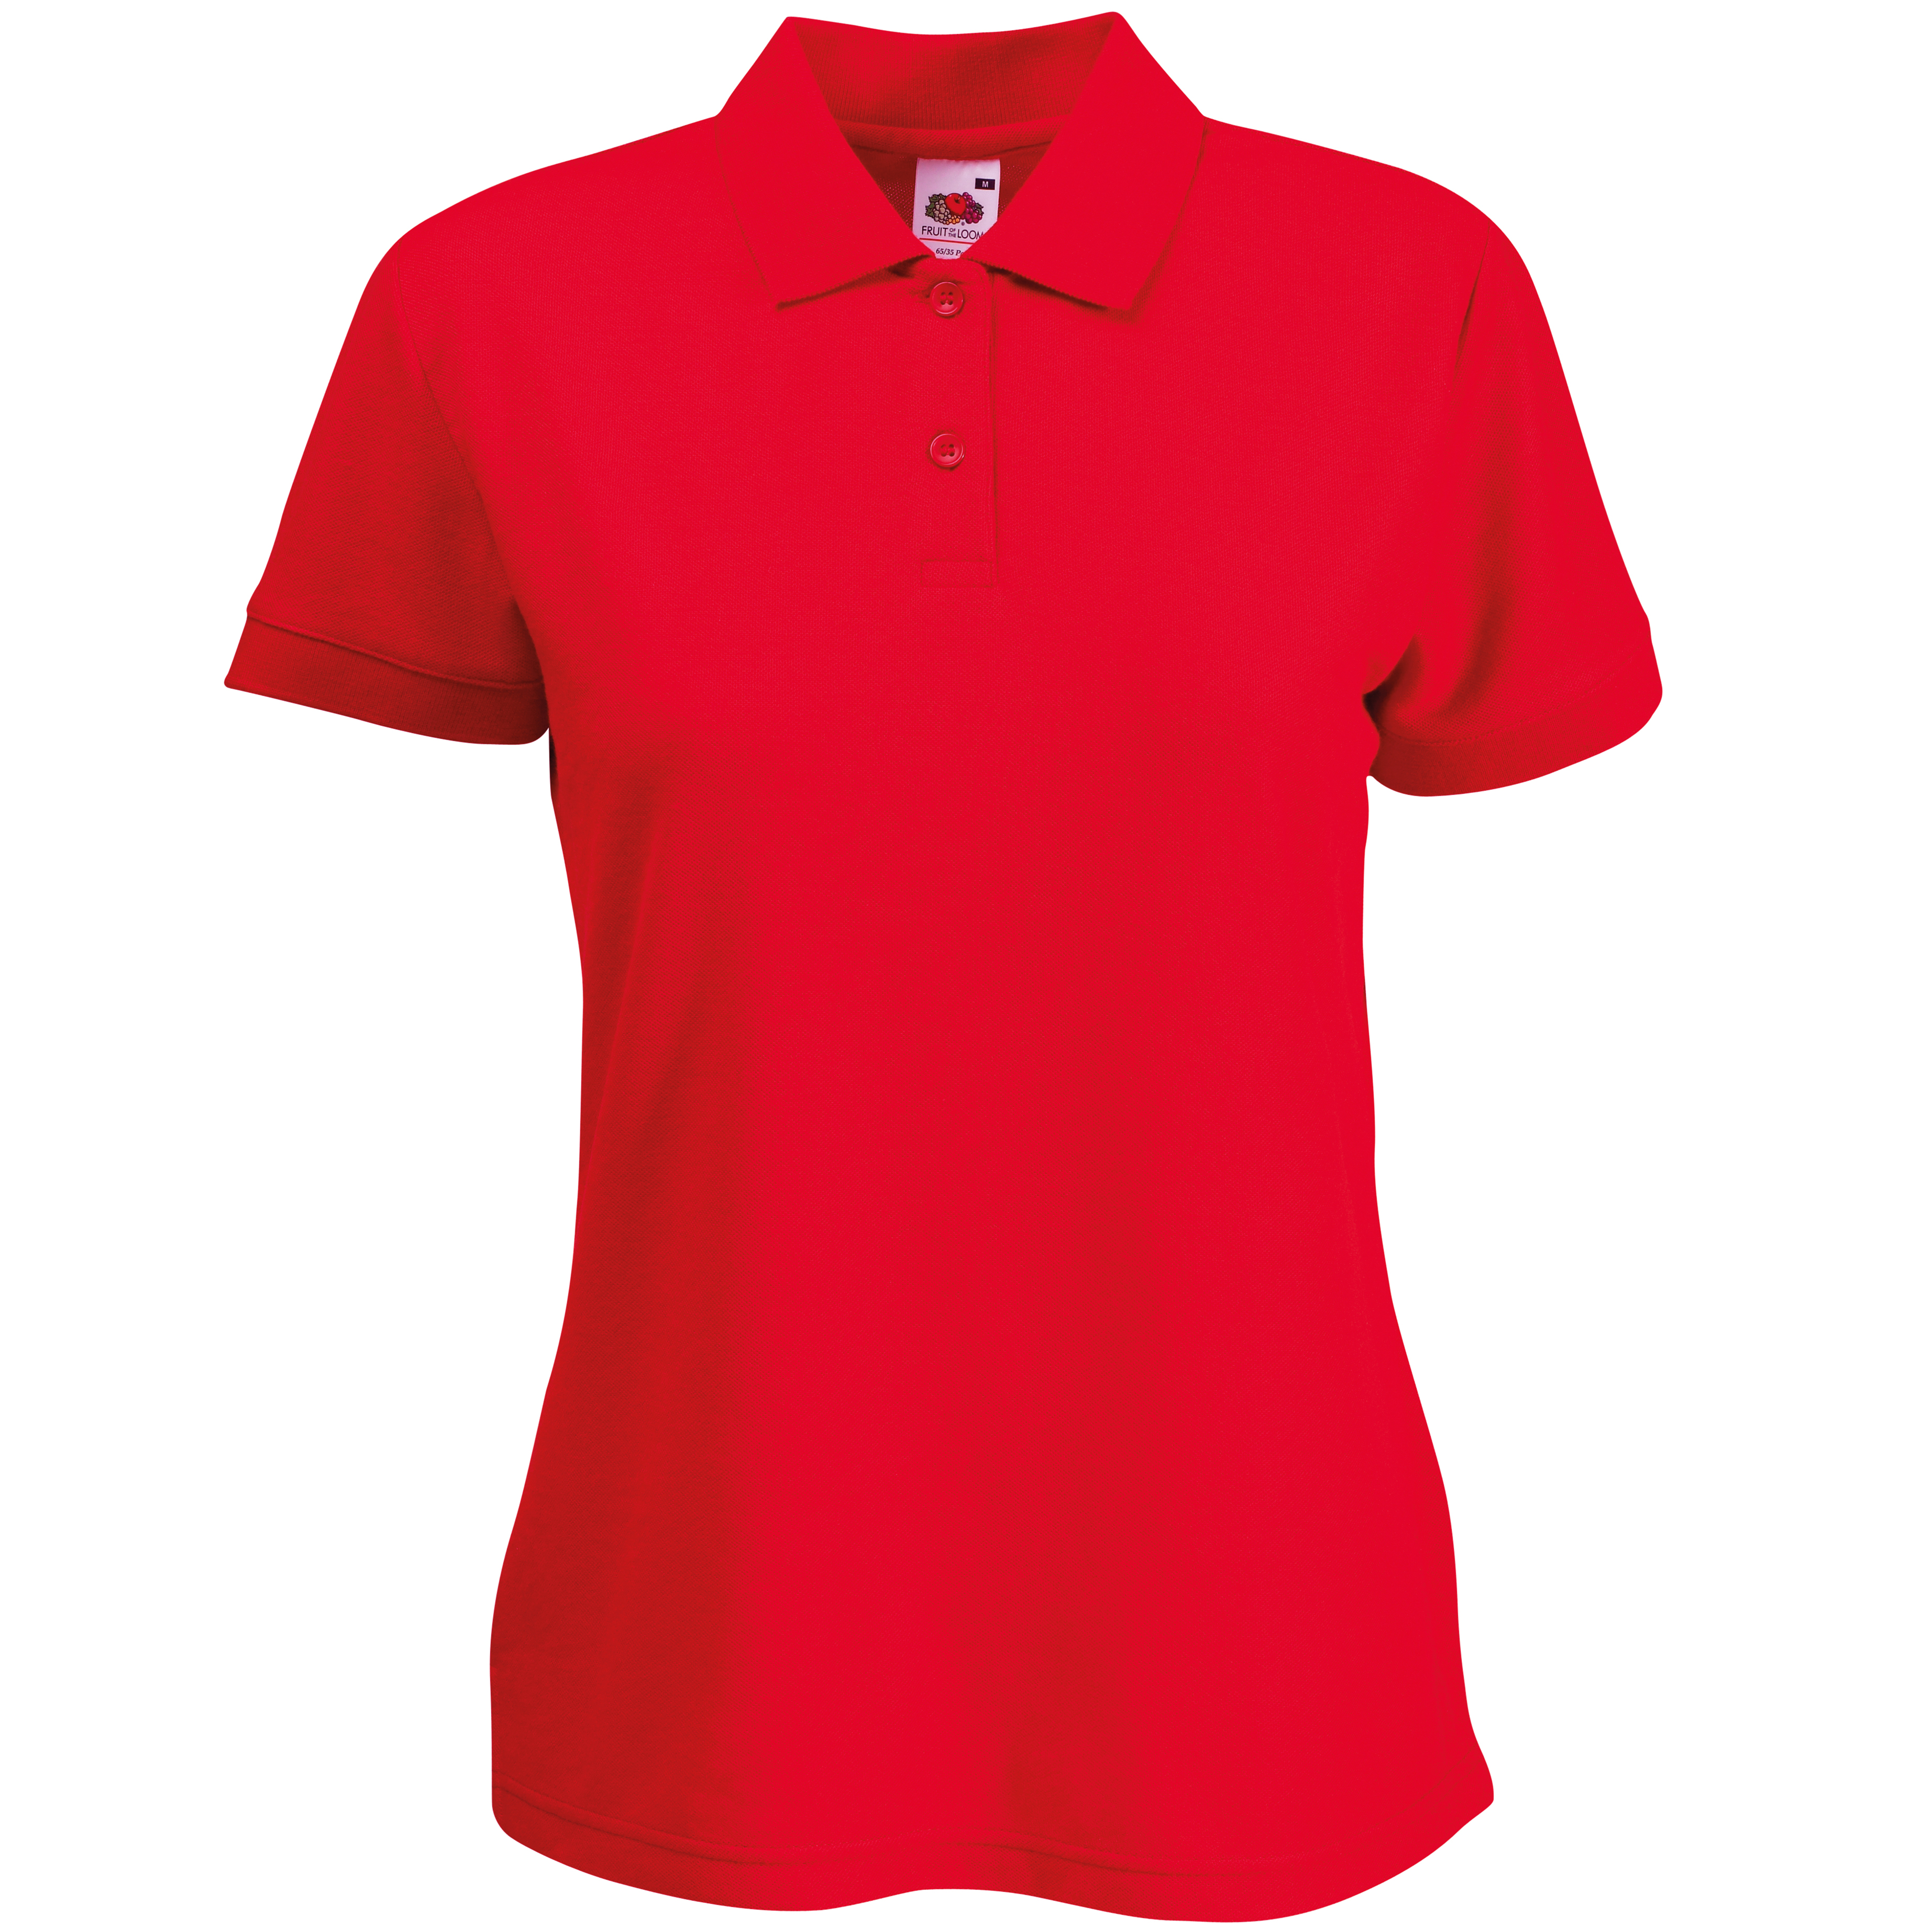 ax-httpswebsystems.s3.amazonaws.comtmp_for_downloadfruit-of-the-loom-ladies-65-35-polo-red.jpg